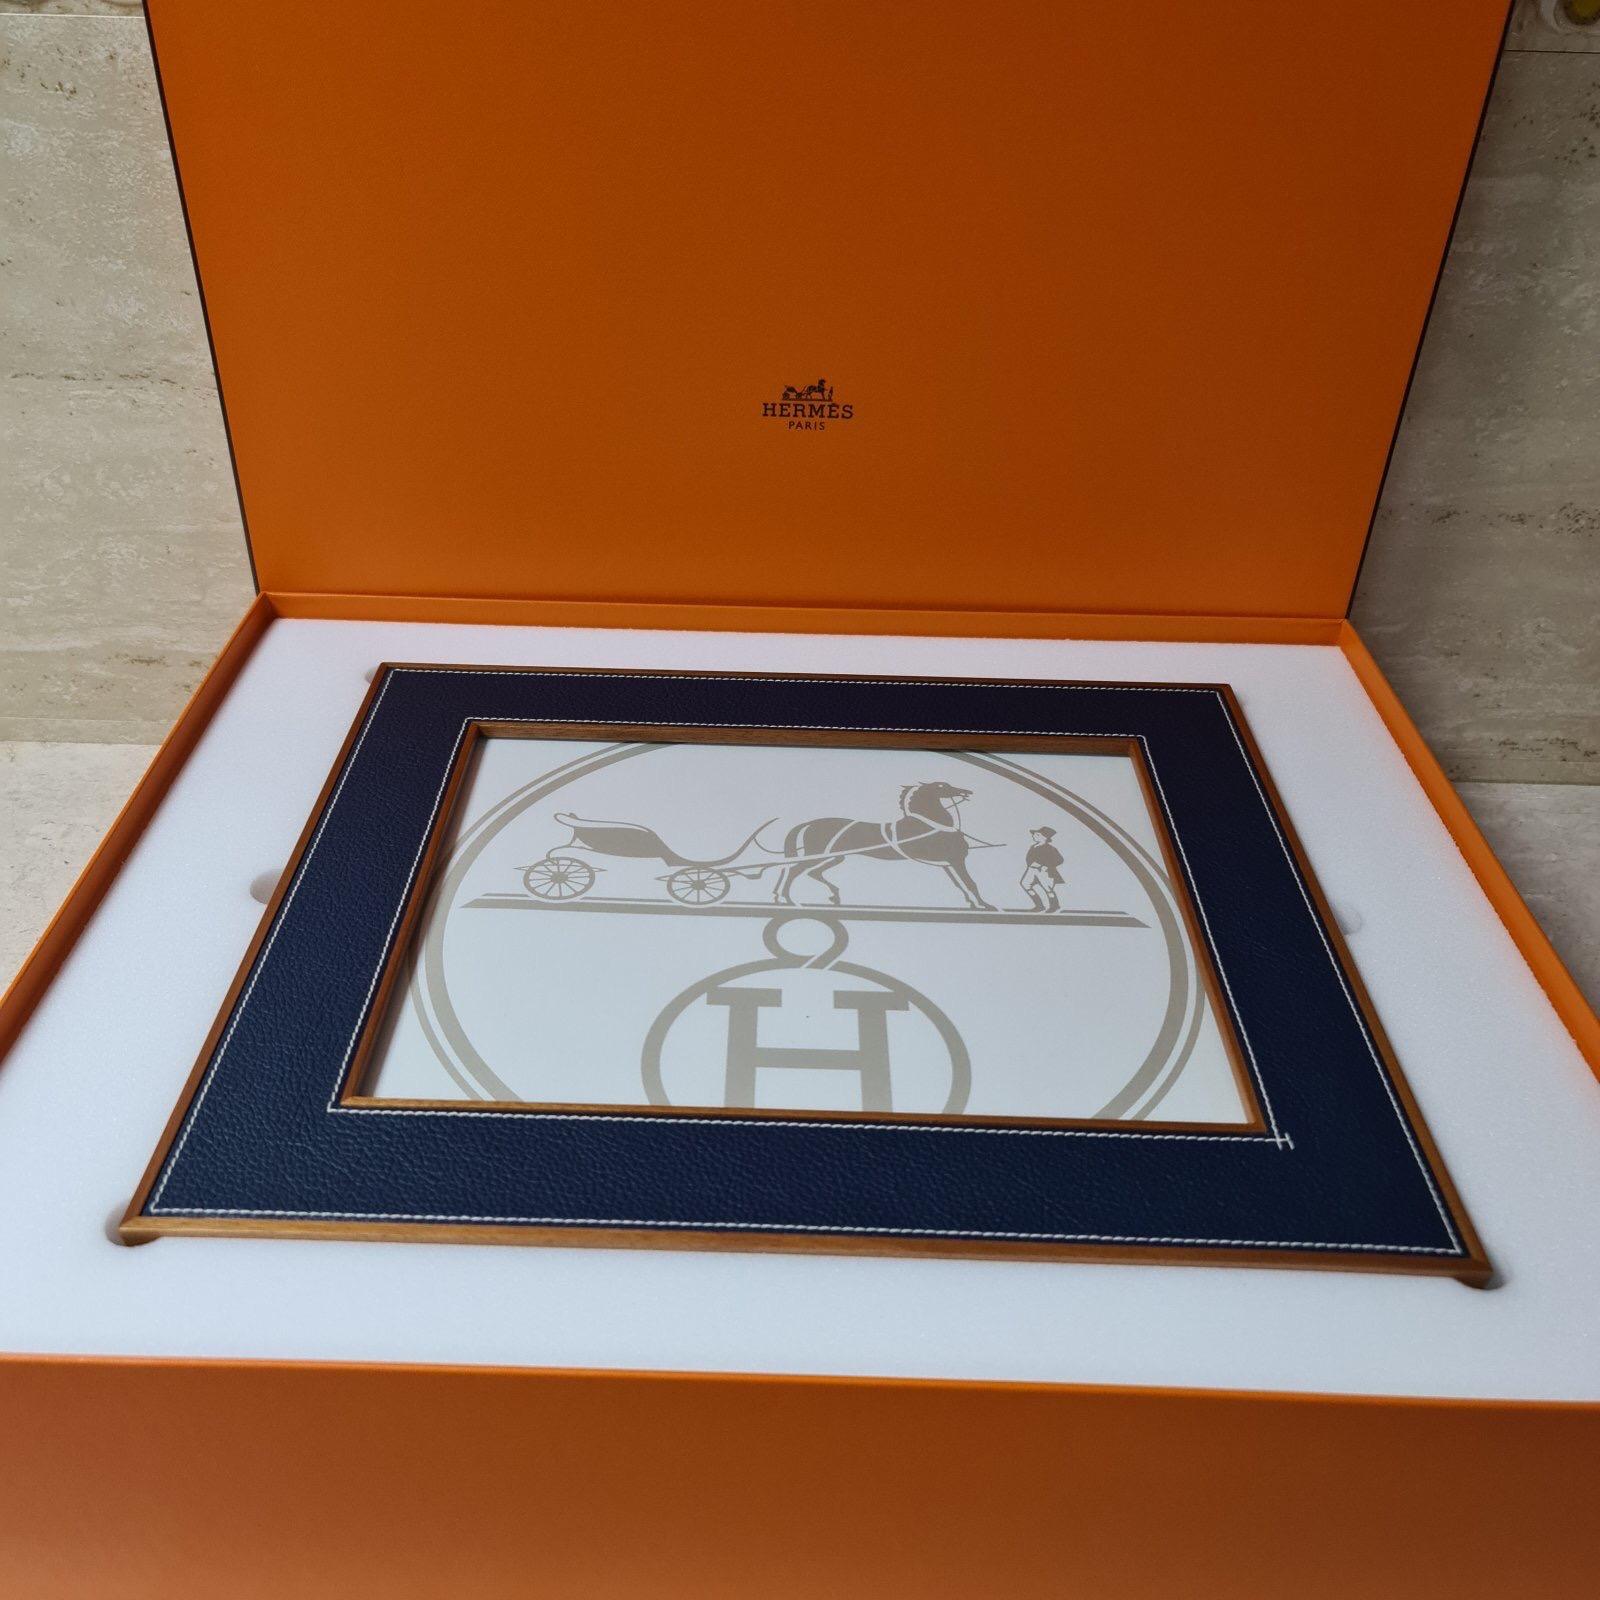 Hermes Classic Pleiade Blue Regate Leather Photo Frame
Color: Bleu Regate (Blue)
Size: Measures 33.5 cm x 28.5 cm, fits a 25 cm x 20 cm photo 
Material: Calfskin with solid natural mahogany
Country of Origin: France

Brand New in Box. Store Fresh.